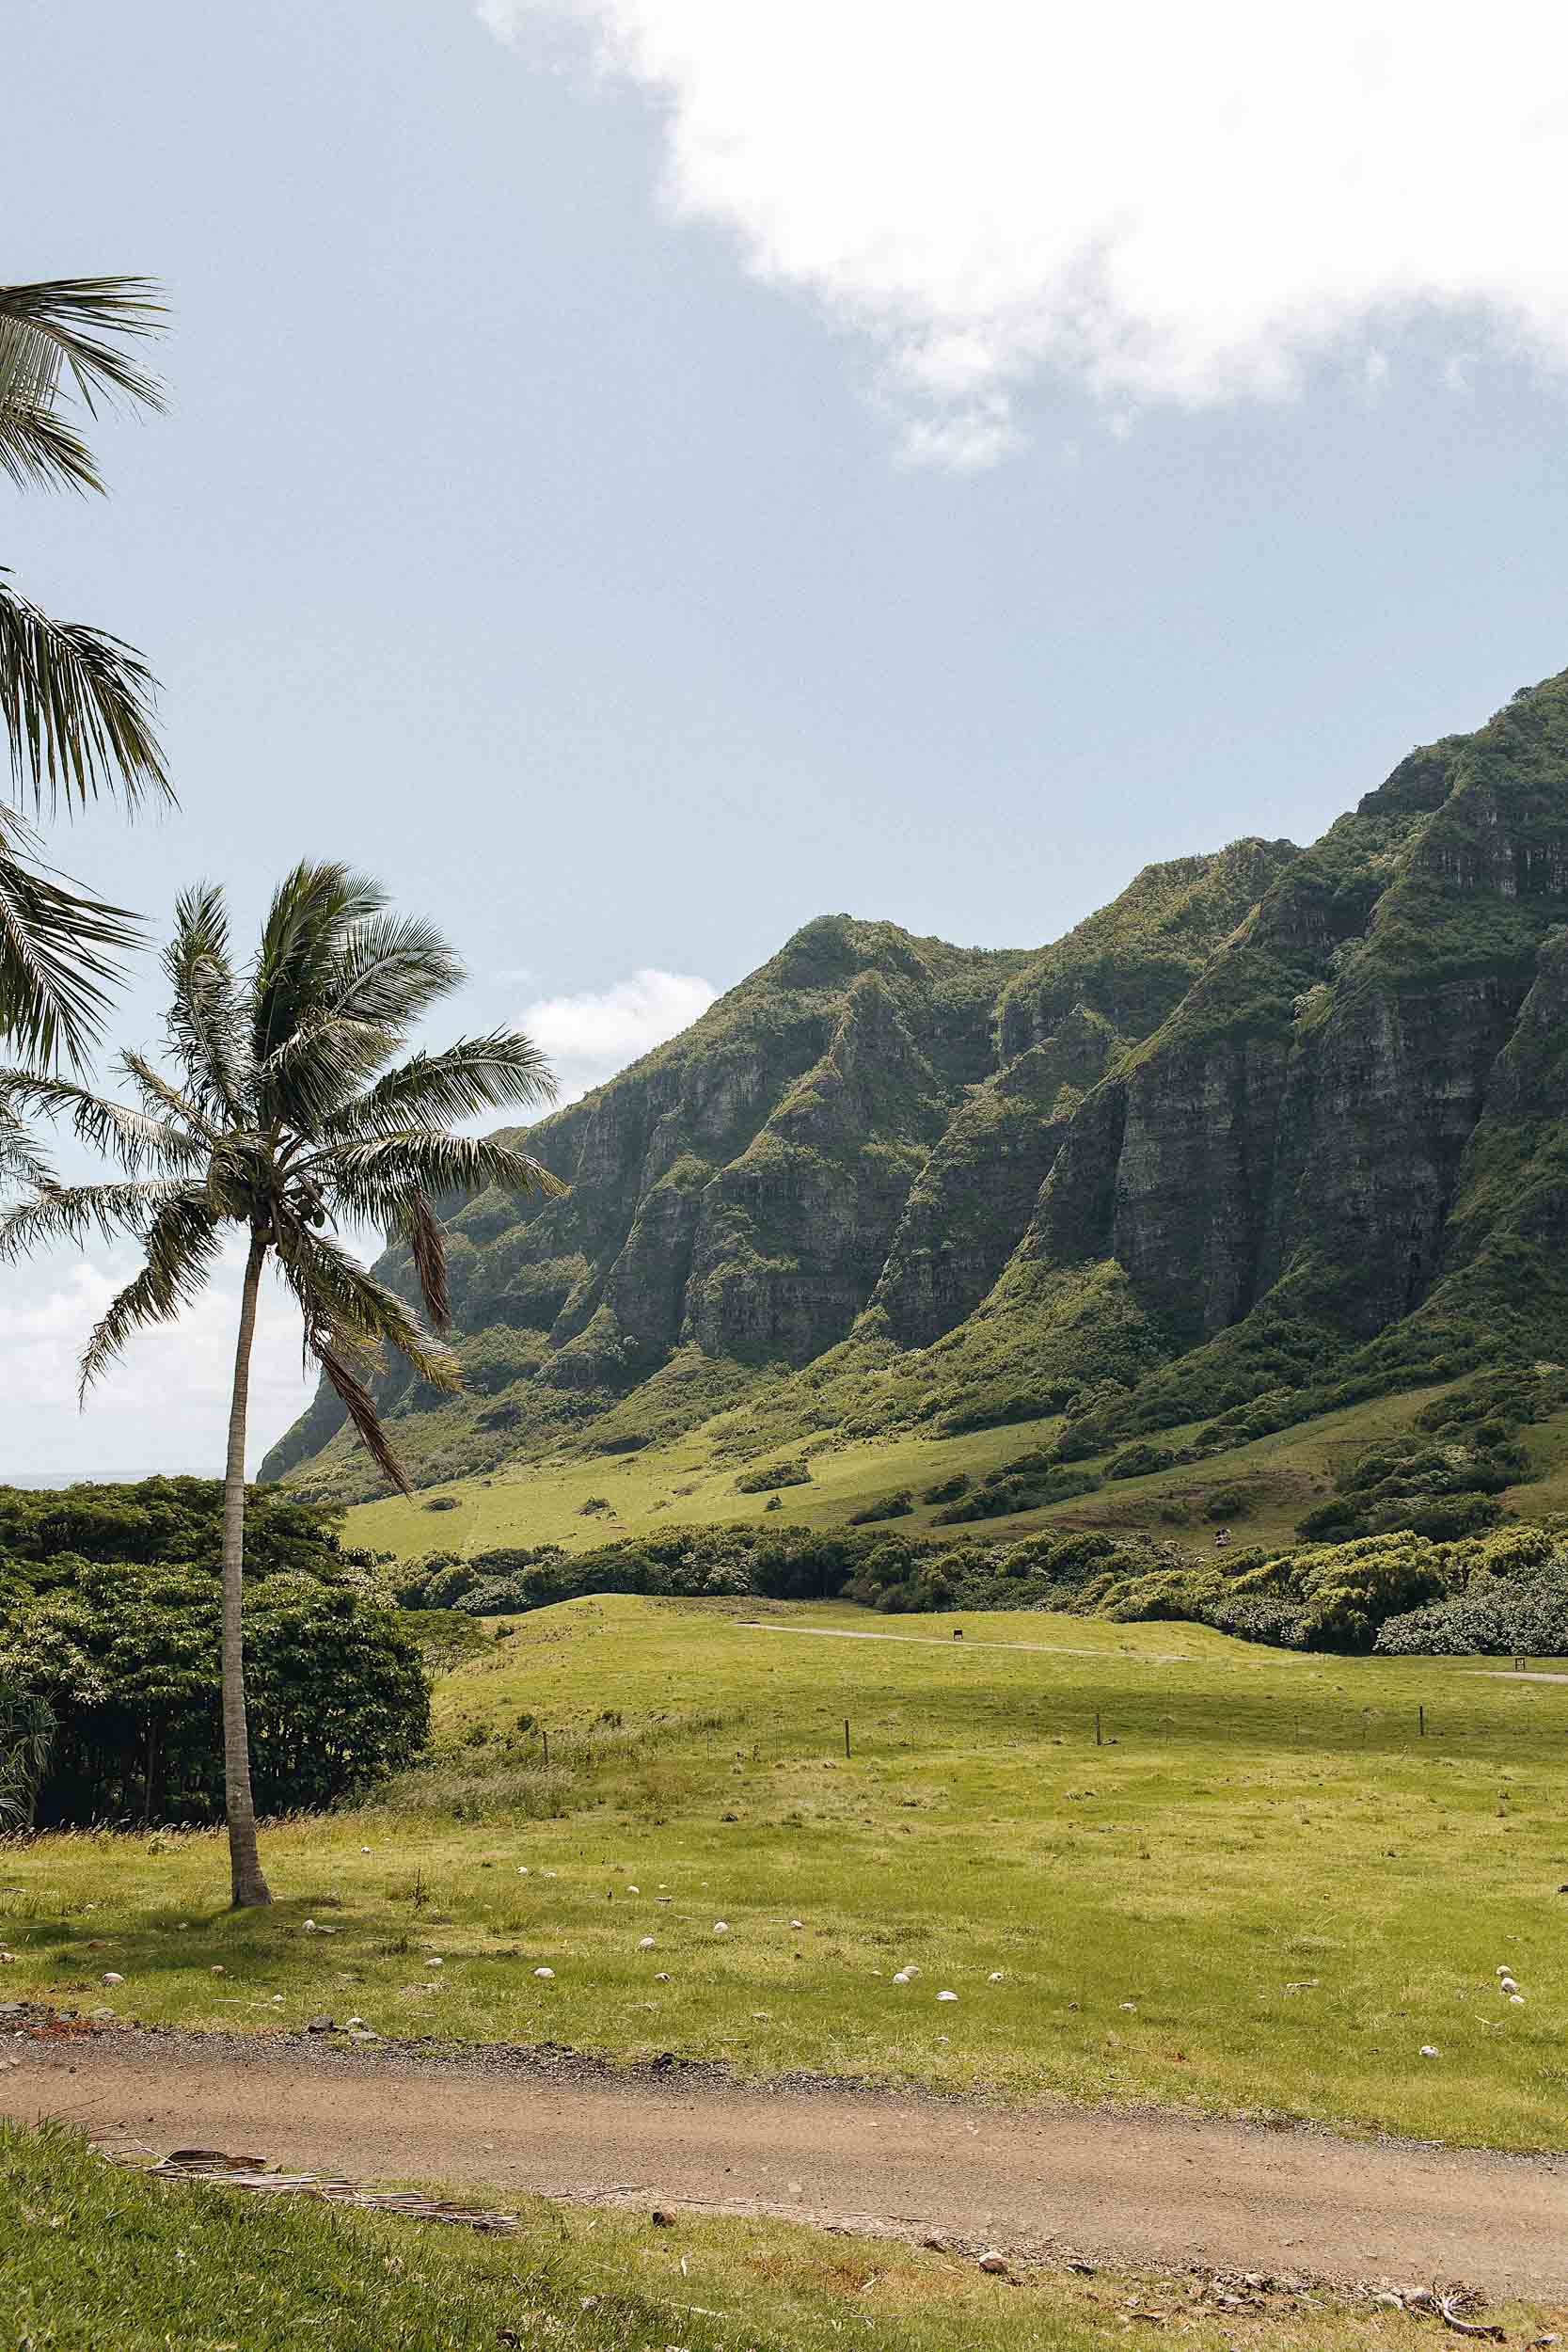 How much does it cost to get into Kualoa Ranch?